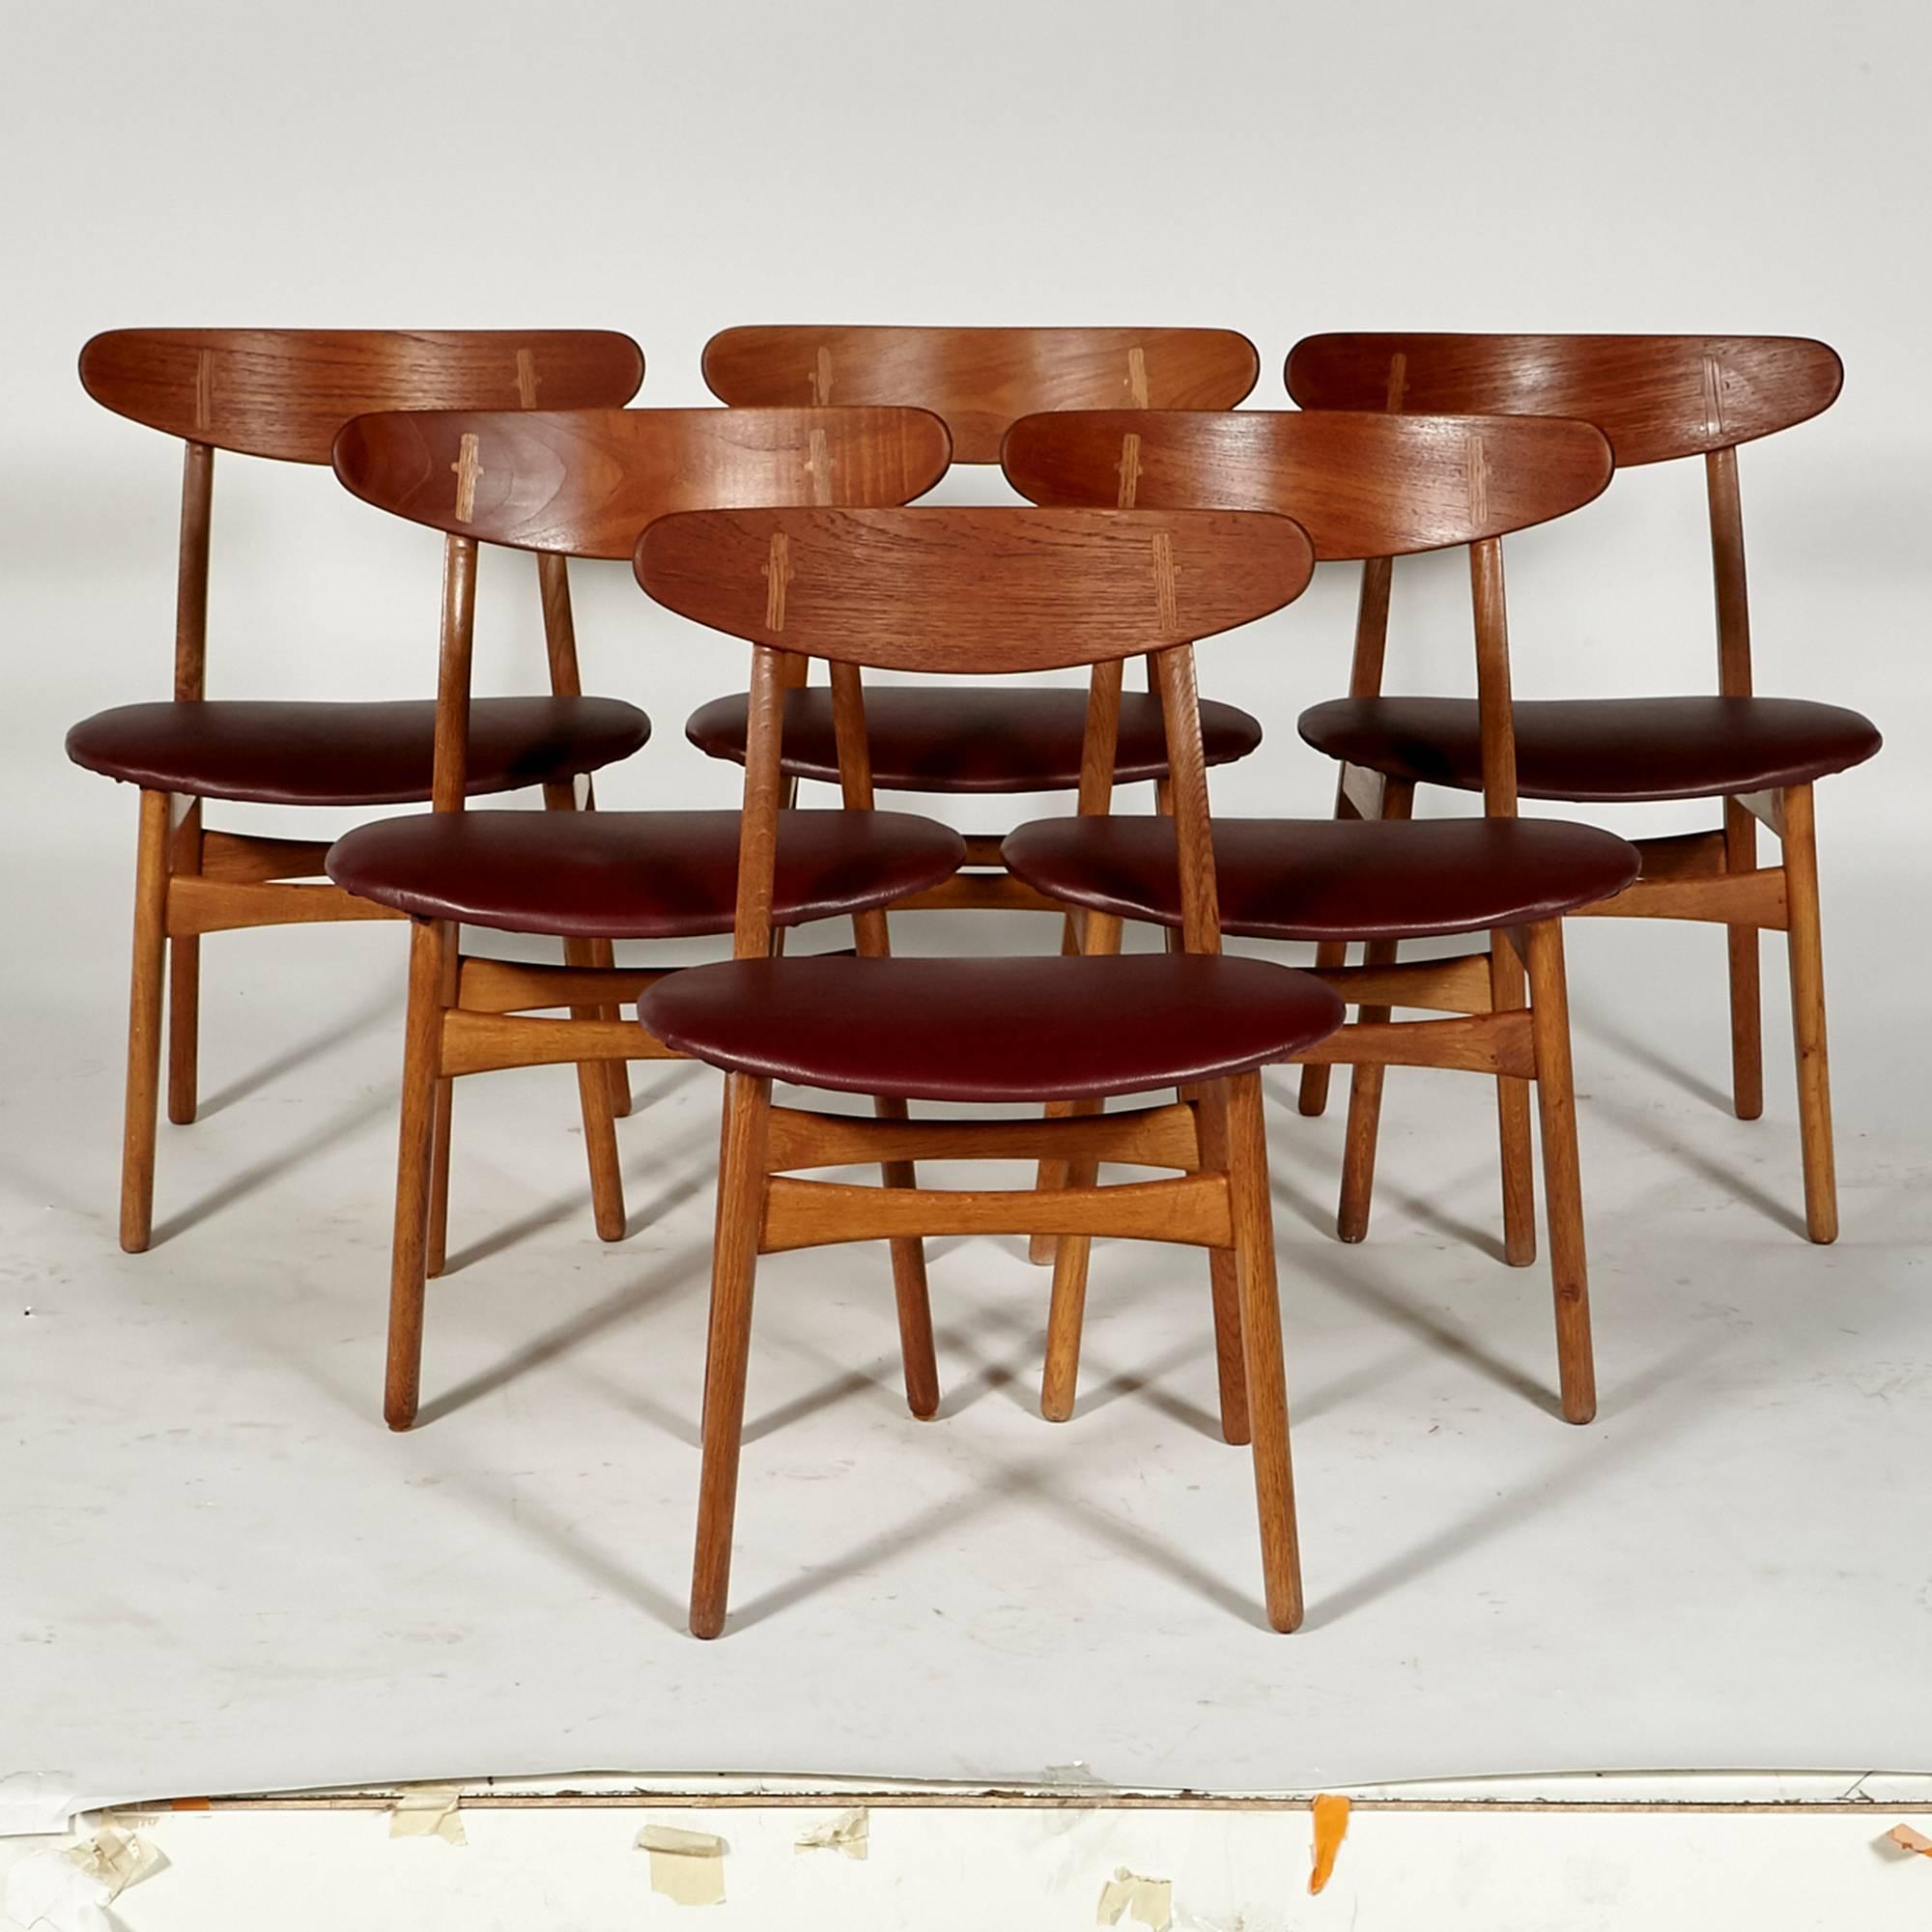 Vintage Danish early 1950s Hans J Wegner for Carl Hansen & Son, set of six CH-30 teak dining chairs with Merlot leather seats. Excellent condition. Unmarked.